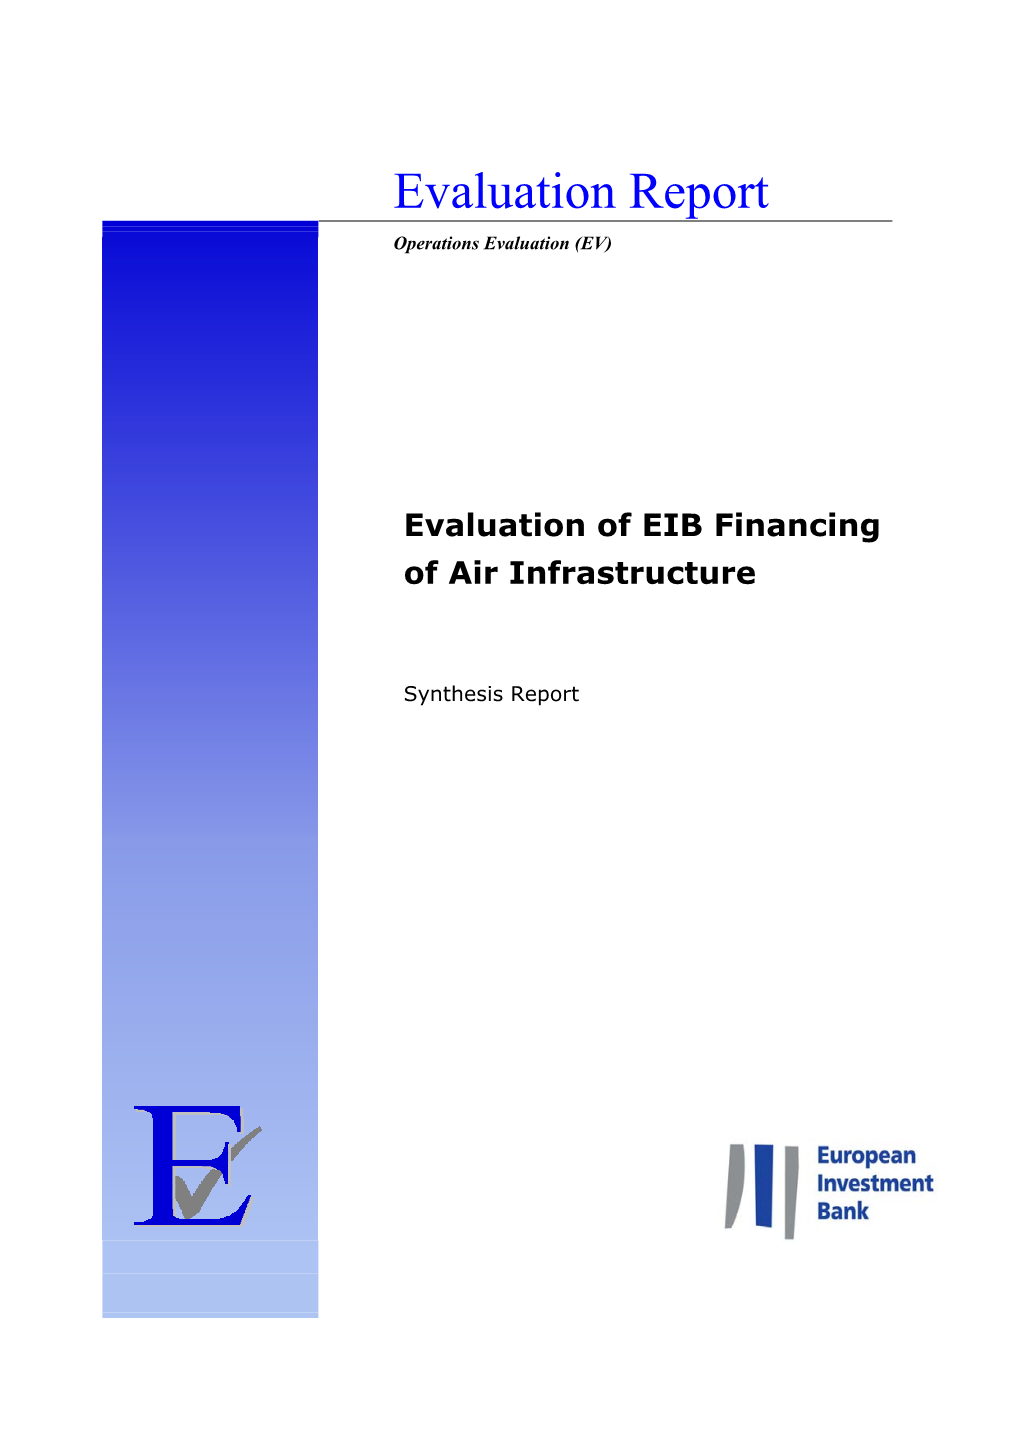 Evaluation of EIB Financing of Air Infrastructure